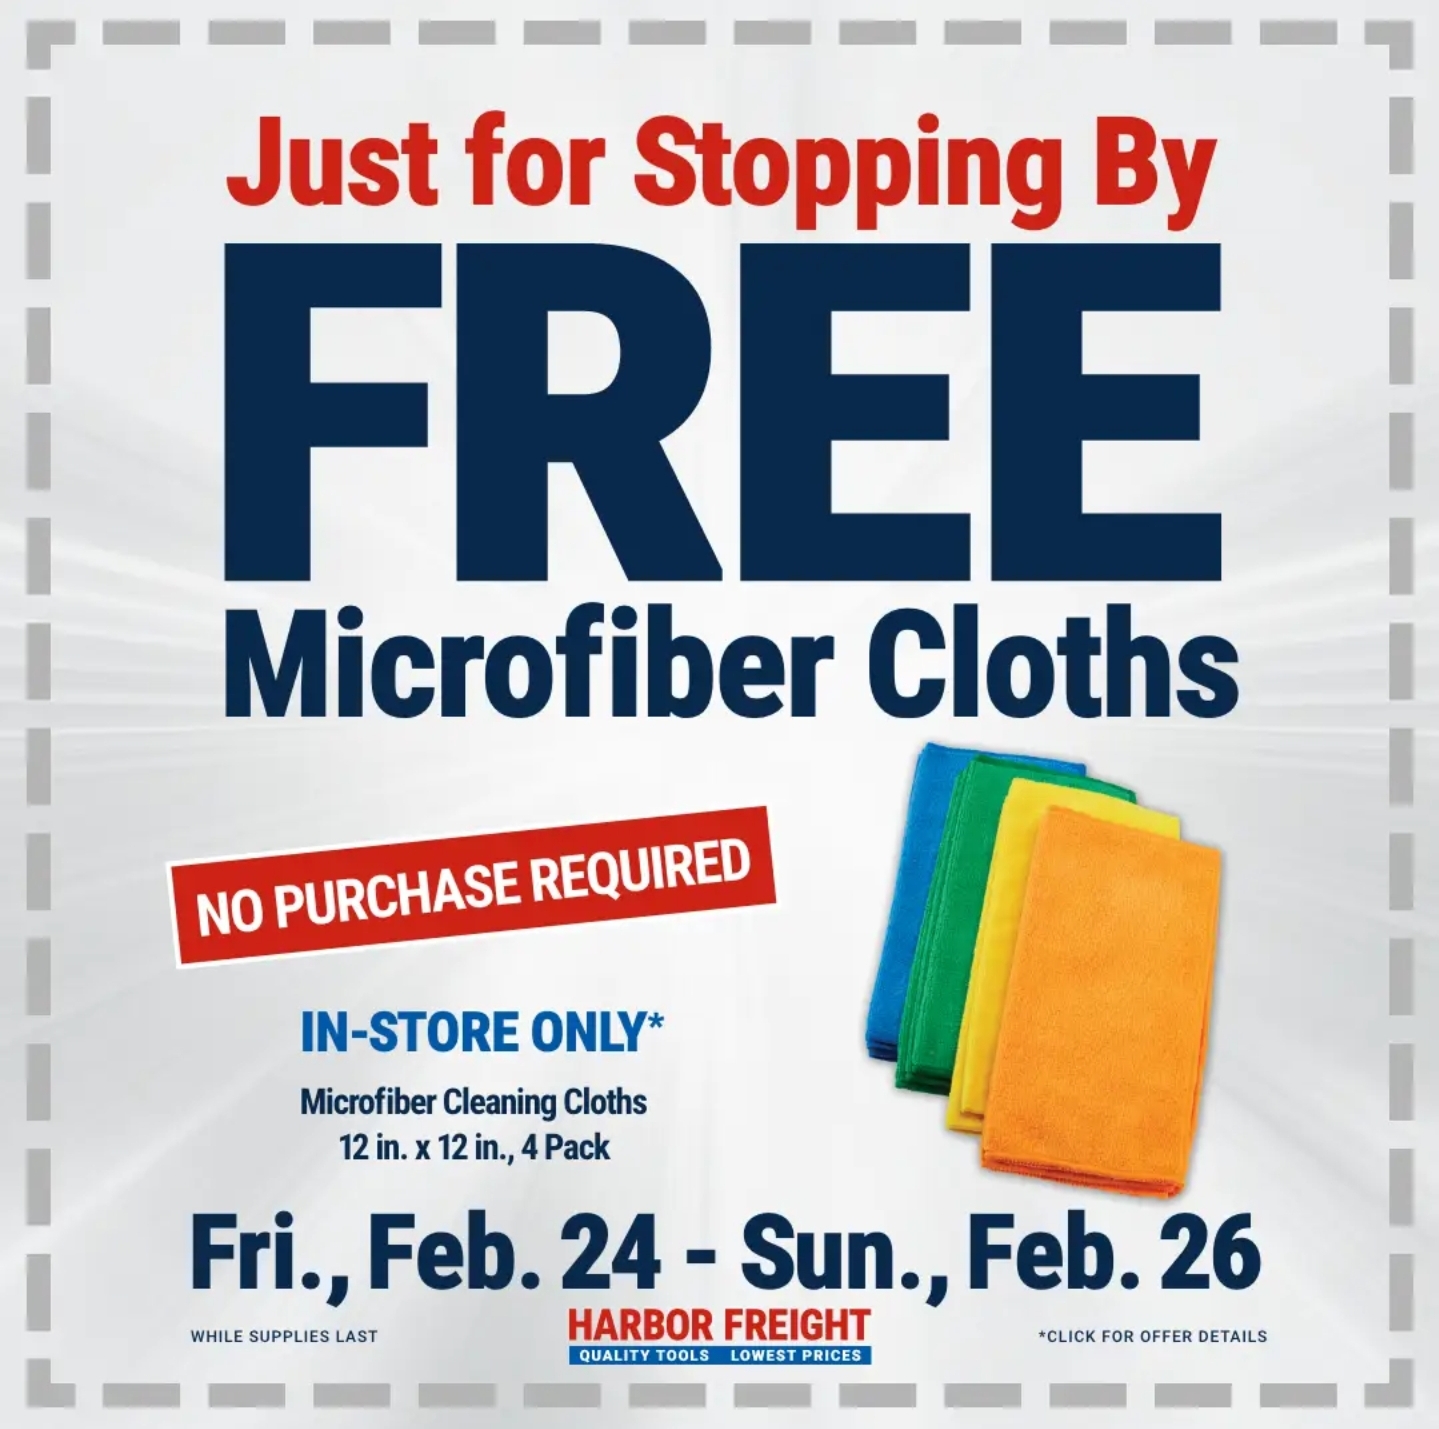 Free Microfiber Cloths at Harbor Freight